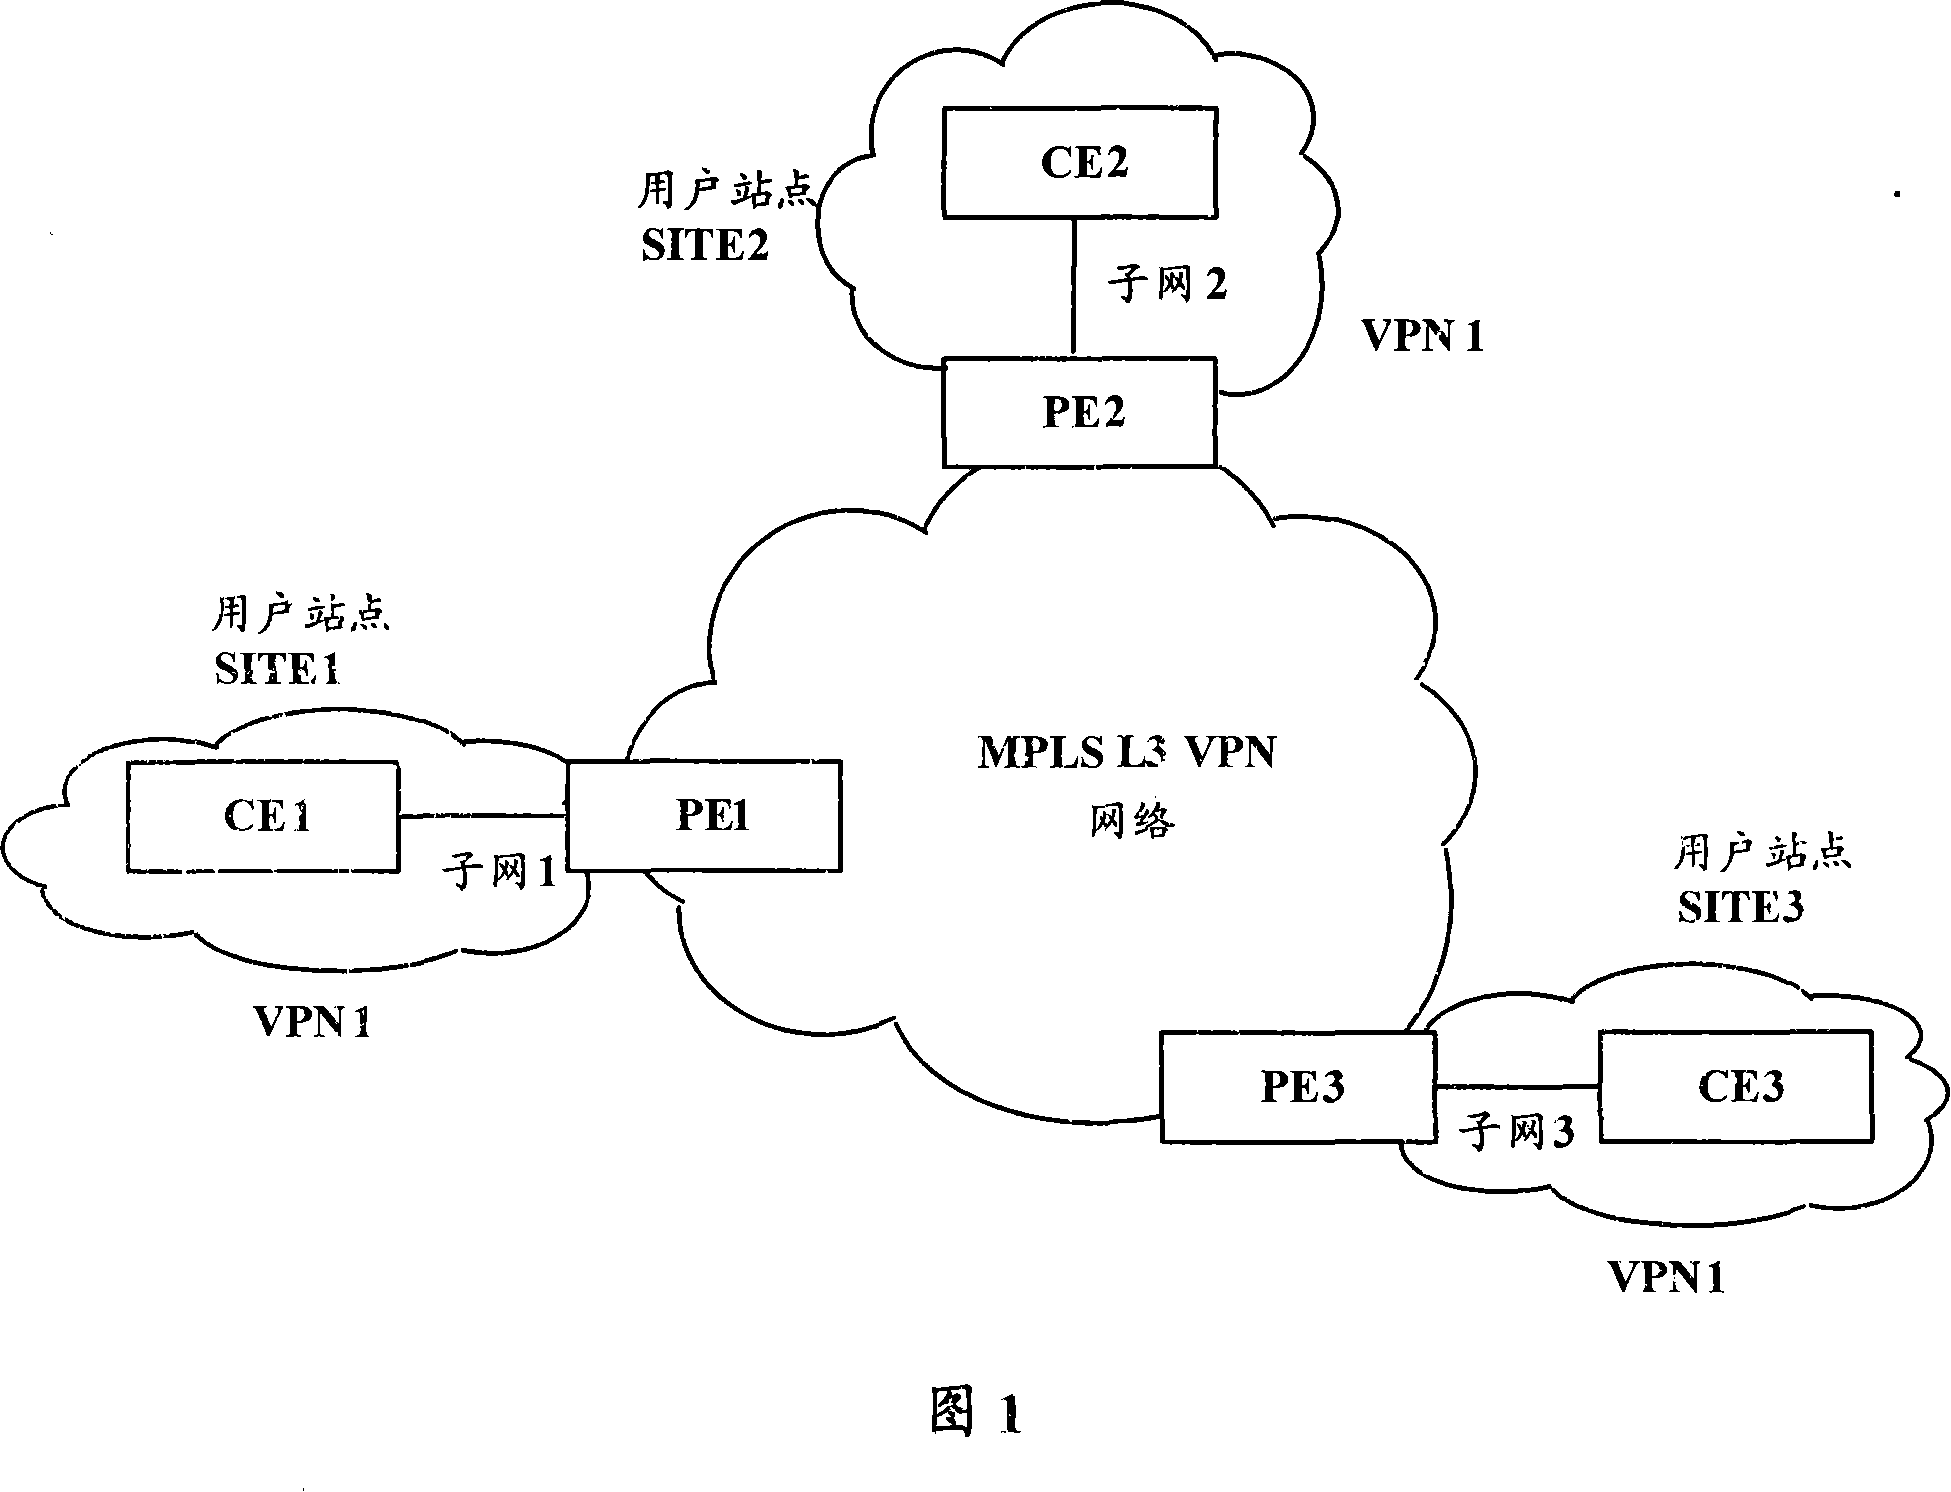 Method for realizing identical subnet communication for MPLS three-layer virtual special net